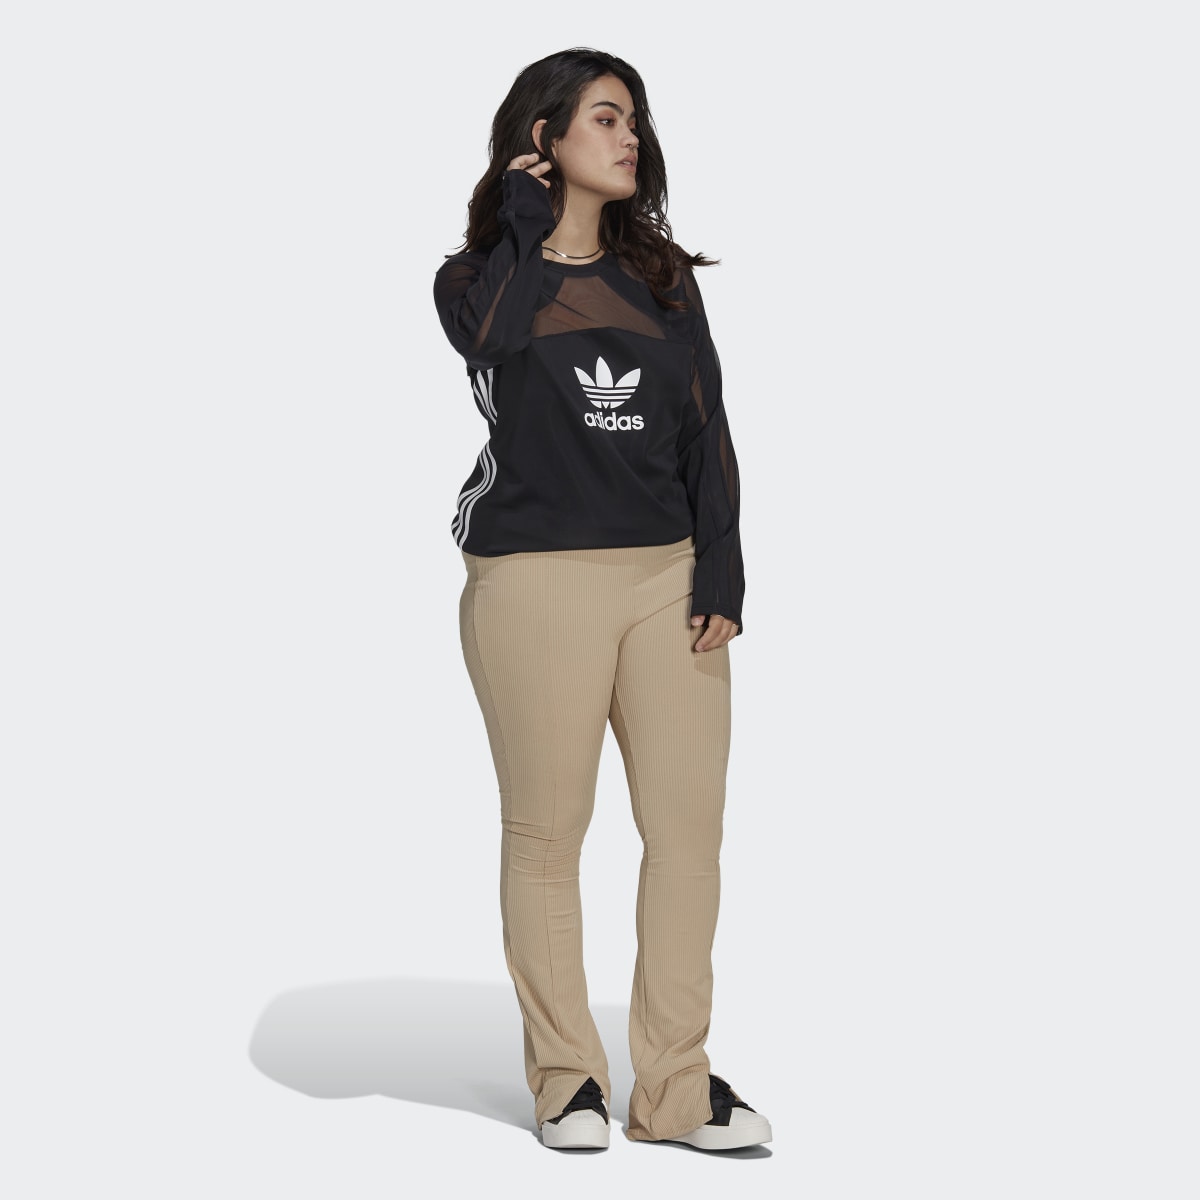 Adidas Centre Stage Mesh Top (Plus Size). 5